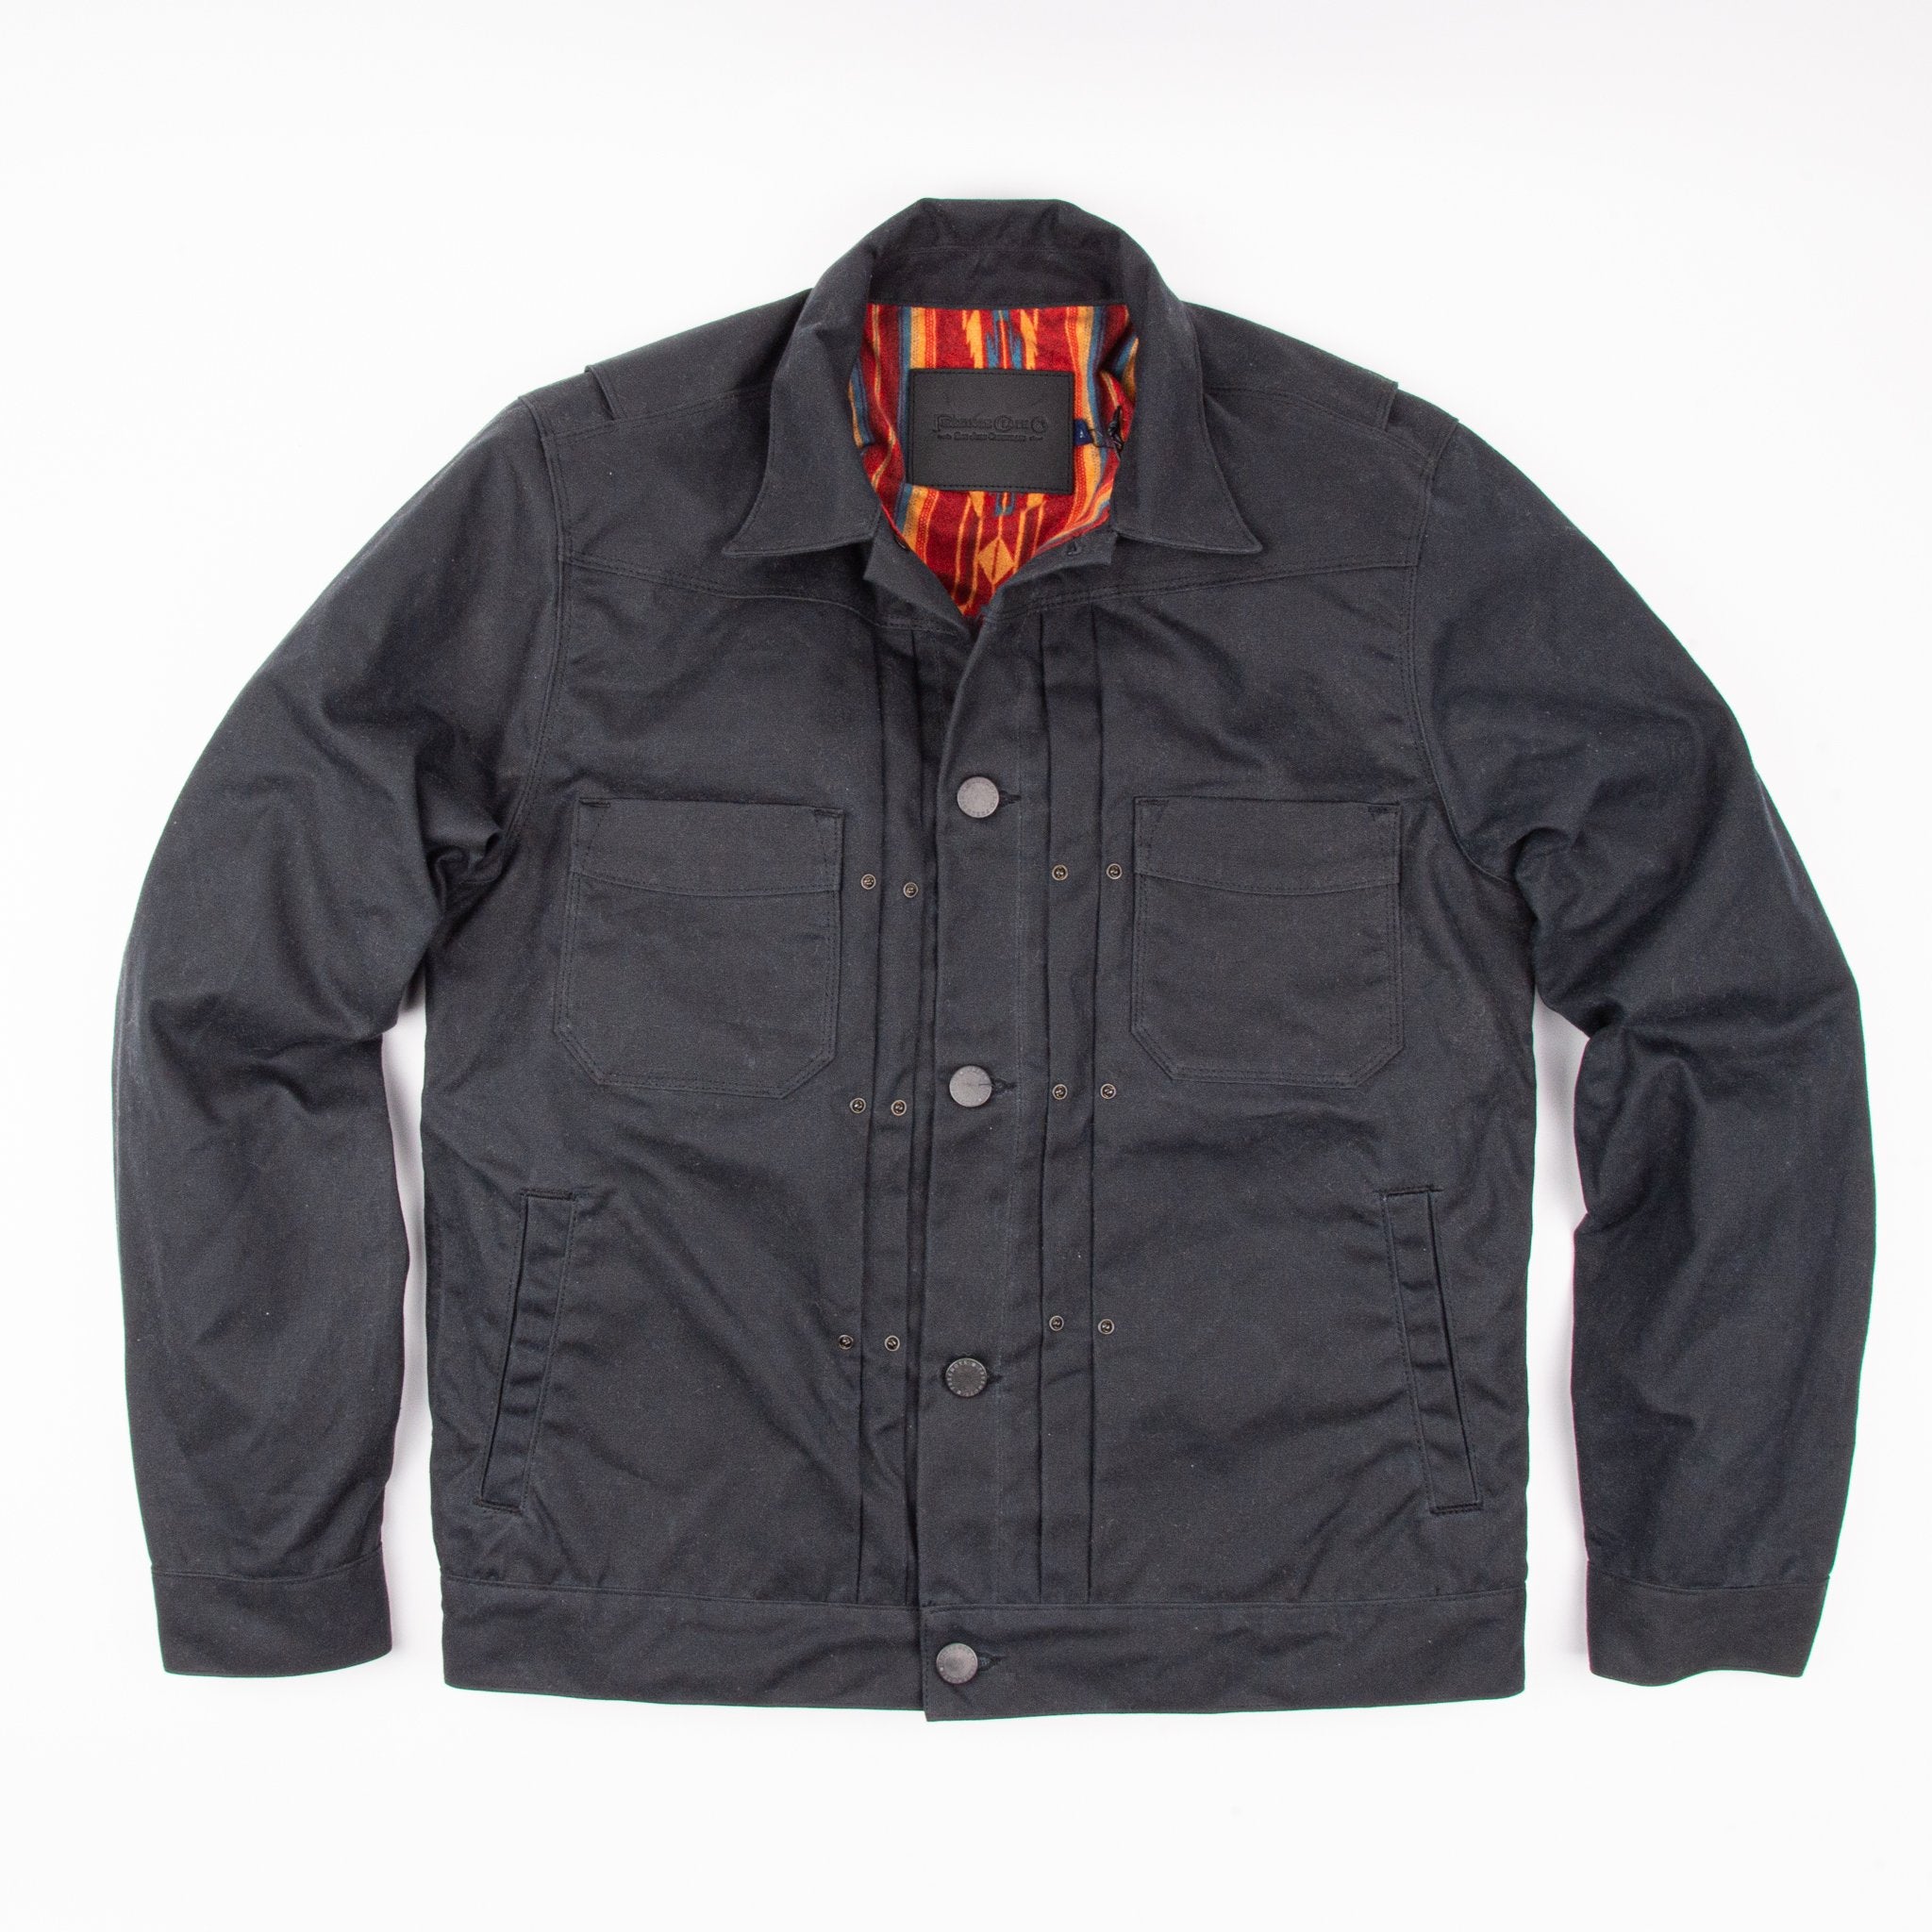 Freenote Cloth Riders Jacket in Black Waxed Canvas - Earl's Authentics